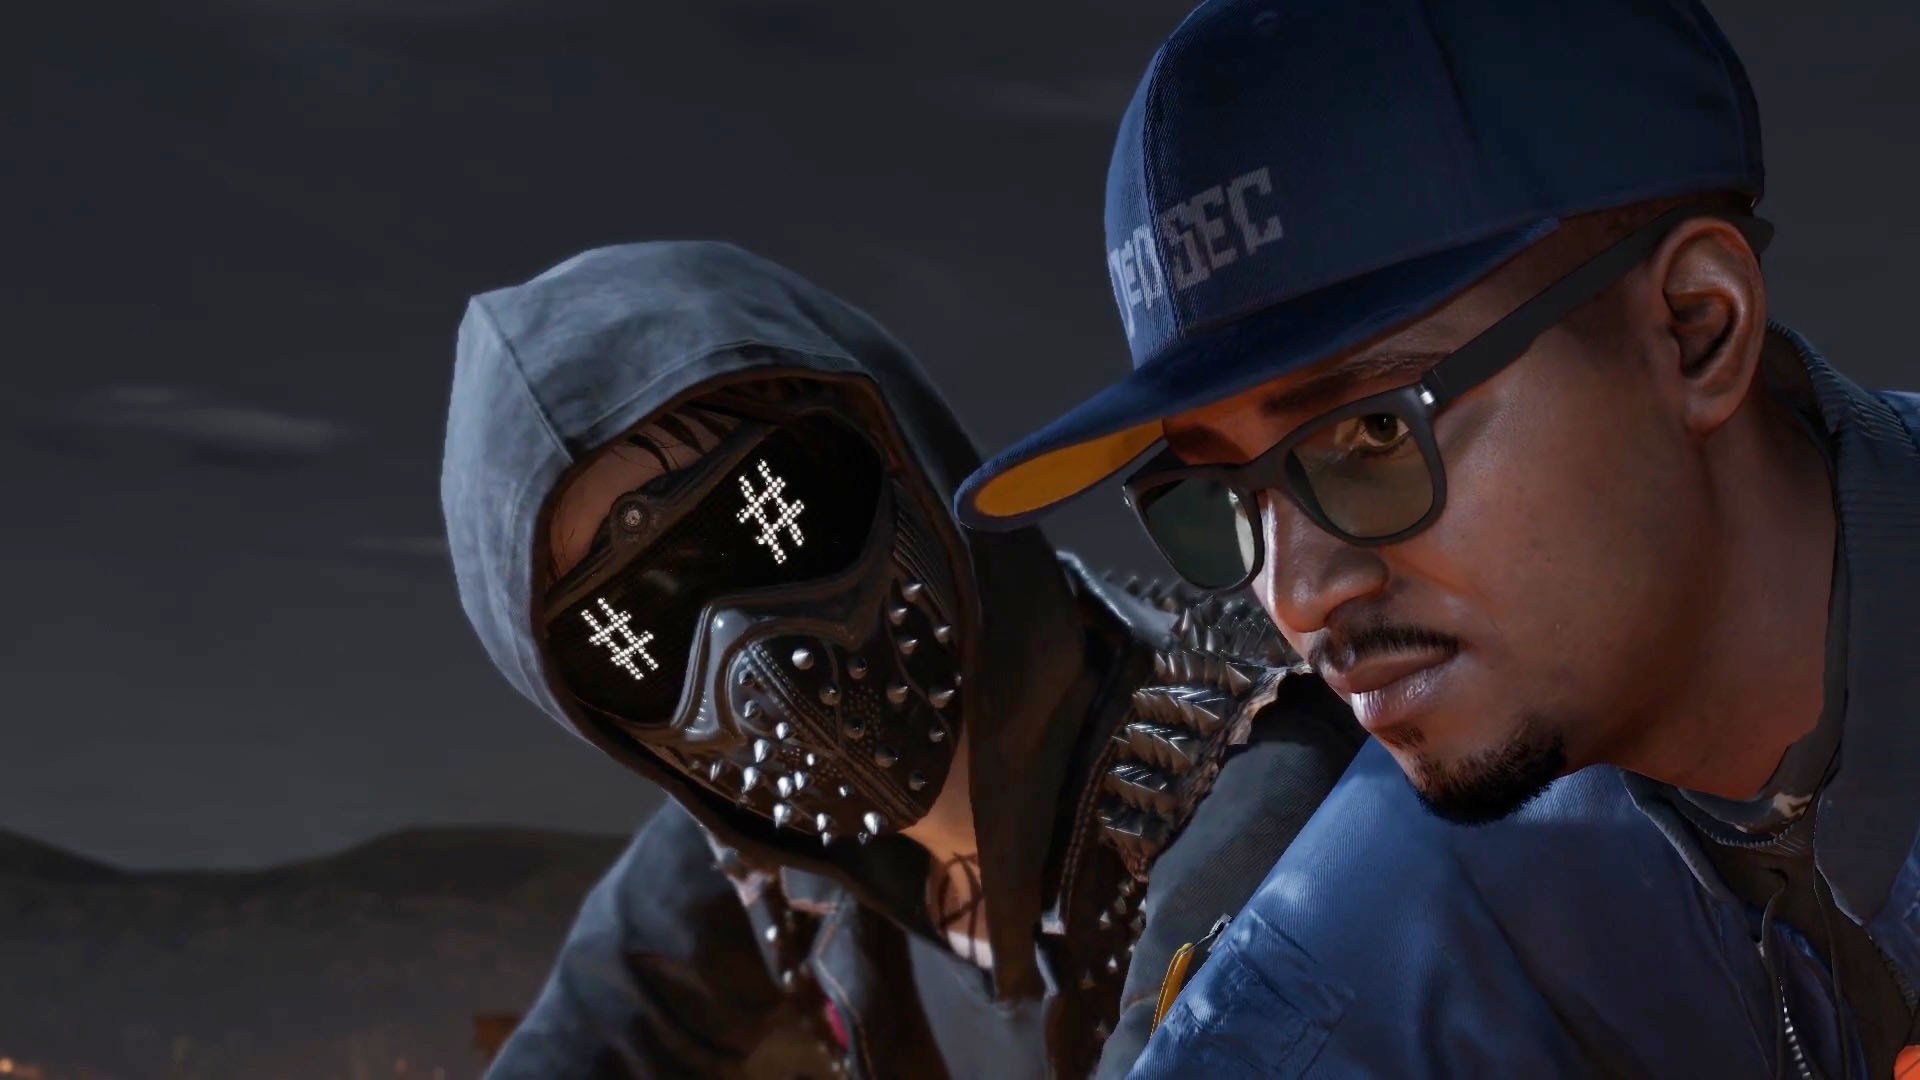 Watch Dogs 2 DLC PS4 Exclusive for 30 Days